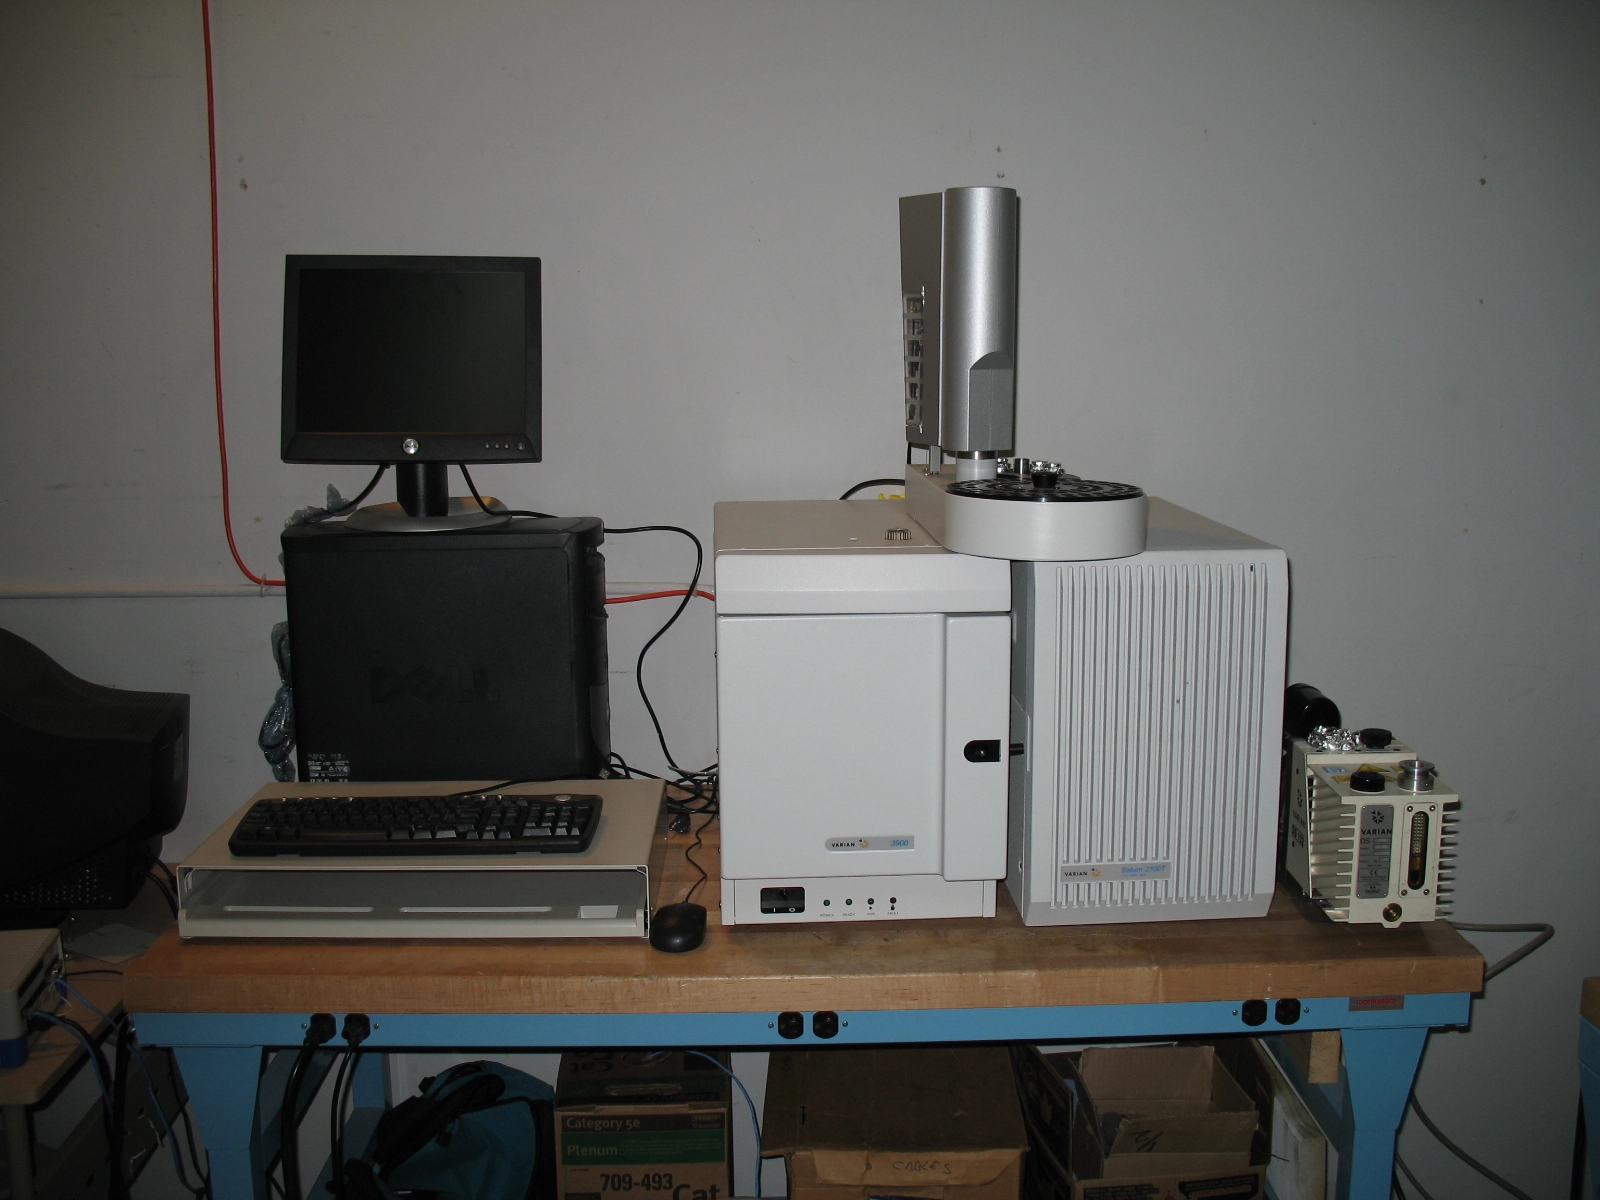 Varian SATURN 2100T GC-Ion trap, MS-MS Capable, Varian 3800 GC, Varian Autosampler, Varian Mass Spectrometer PC with Software